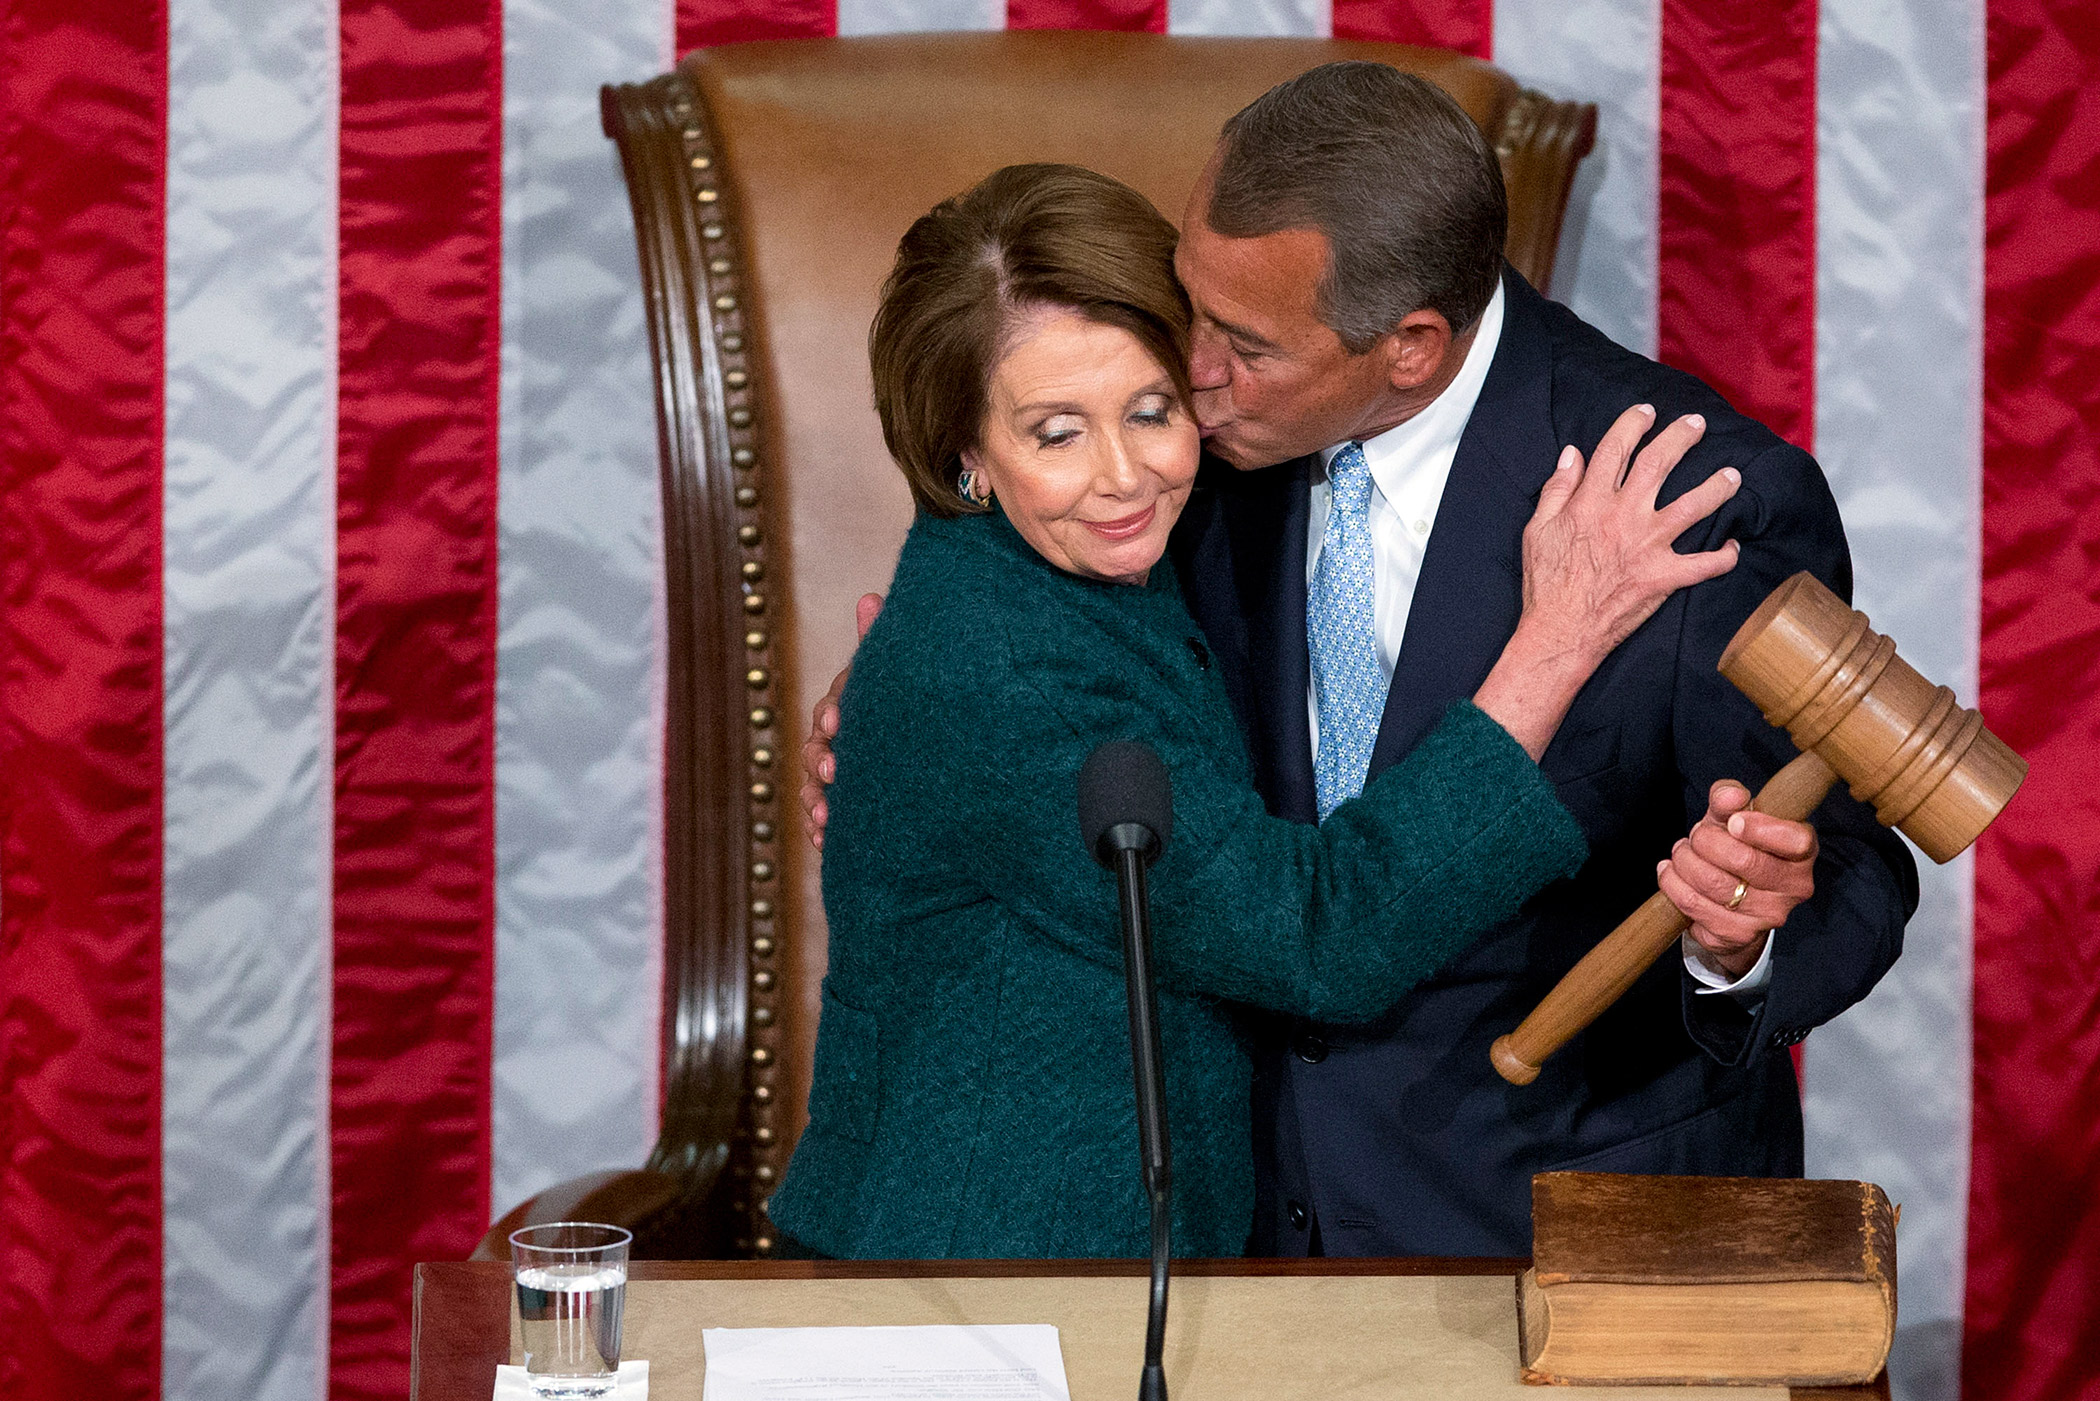 Boehner kisses former Democratic Speaker Nancy Pelosi during the first session of the 114th Congress in the House Chamber at the U.S. Capitol in Washington on Jan. 6, 2015.